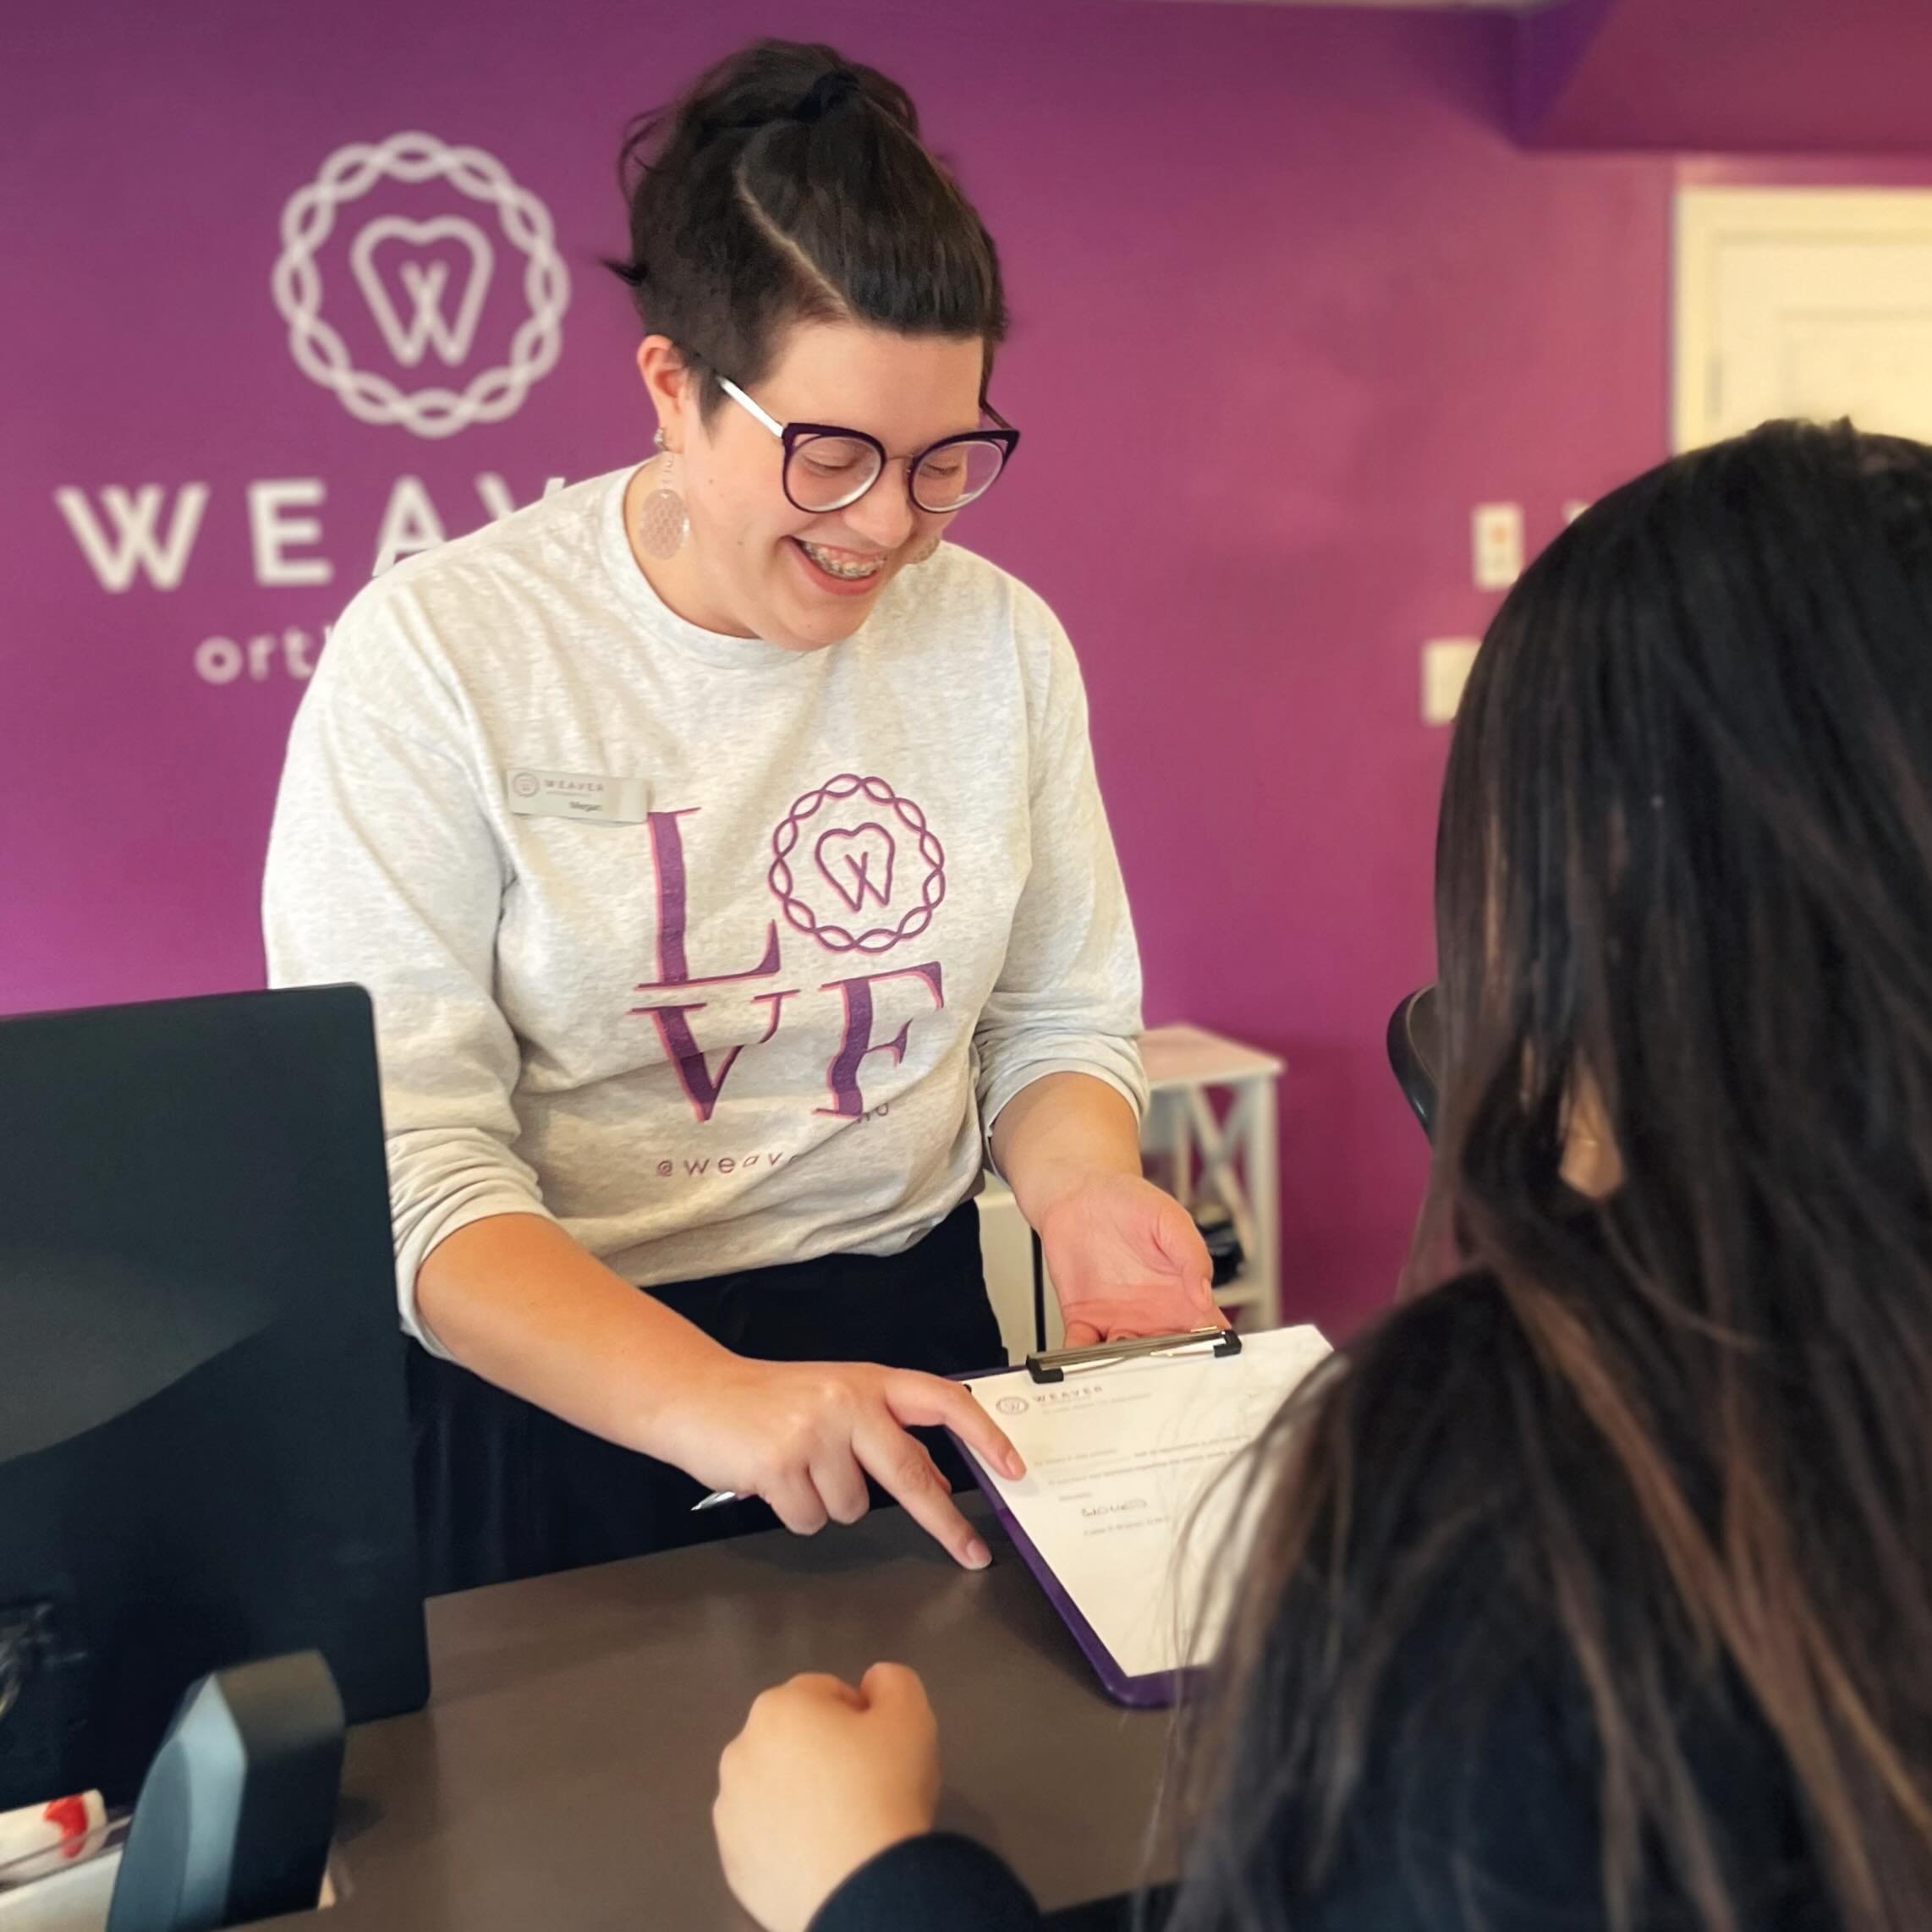 At Weaver Orthodontics, we embrace fun, friendliness, and a warm welcome for patients of all ages! 💜🌟
.
.
.
#weaver #weaverorthodontics #fyp #fypシ #fypage #trending #dental #dentaloffice #ortho #orthodontics #orthooffice #invisalign #braces #retain